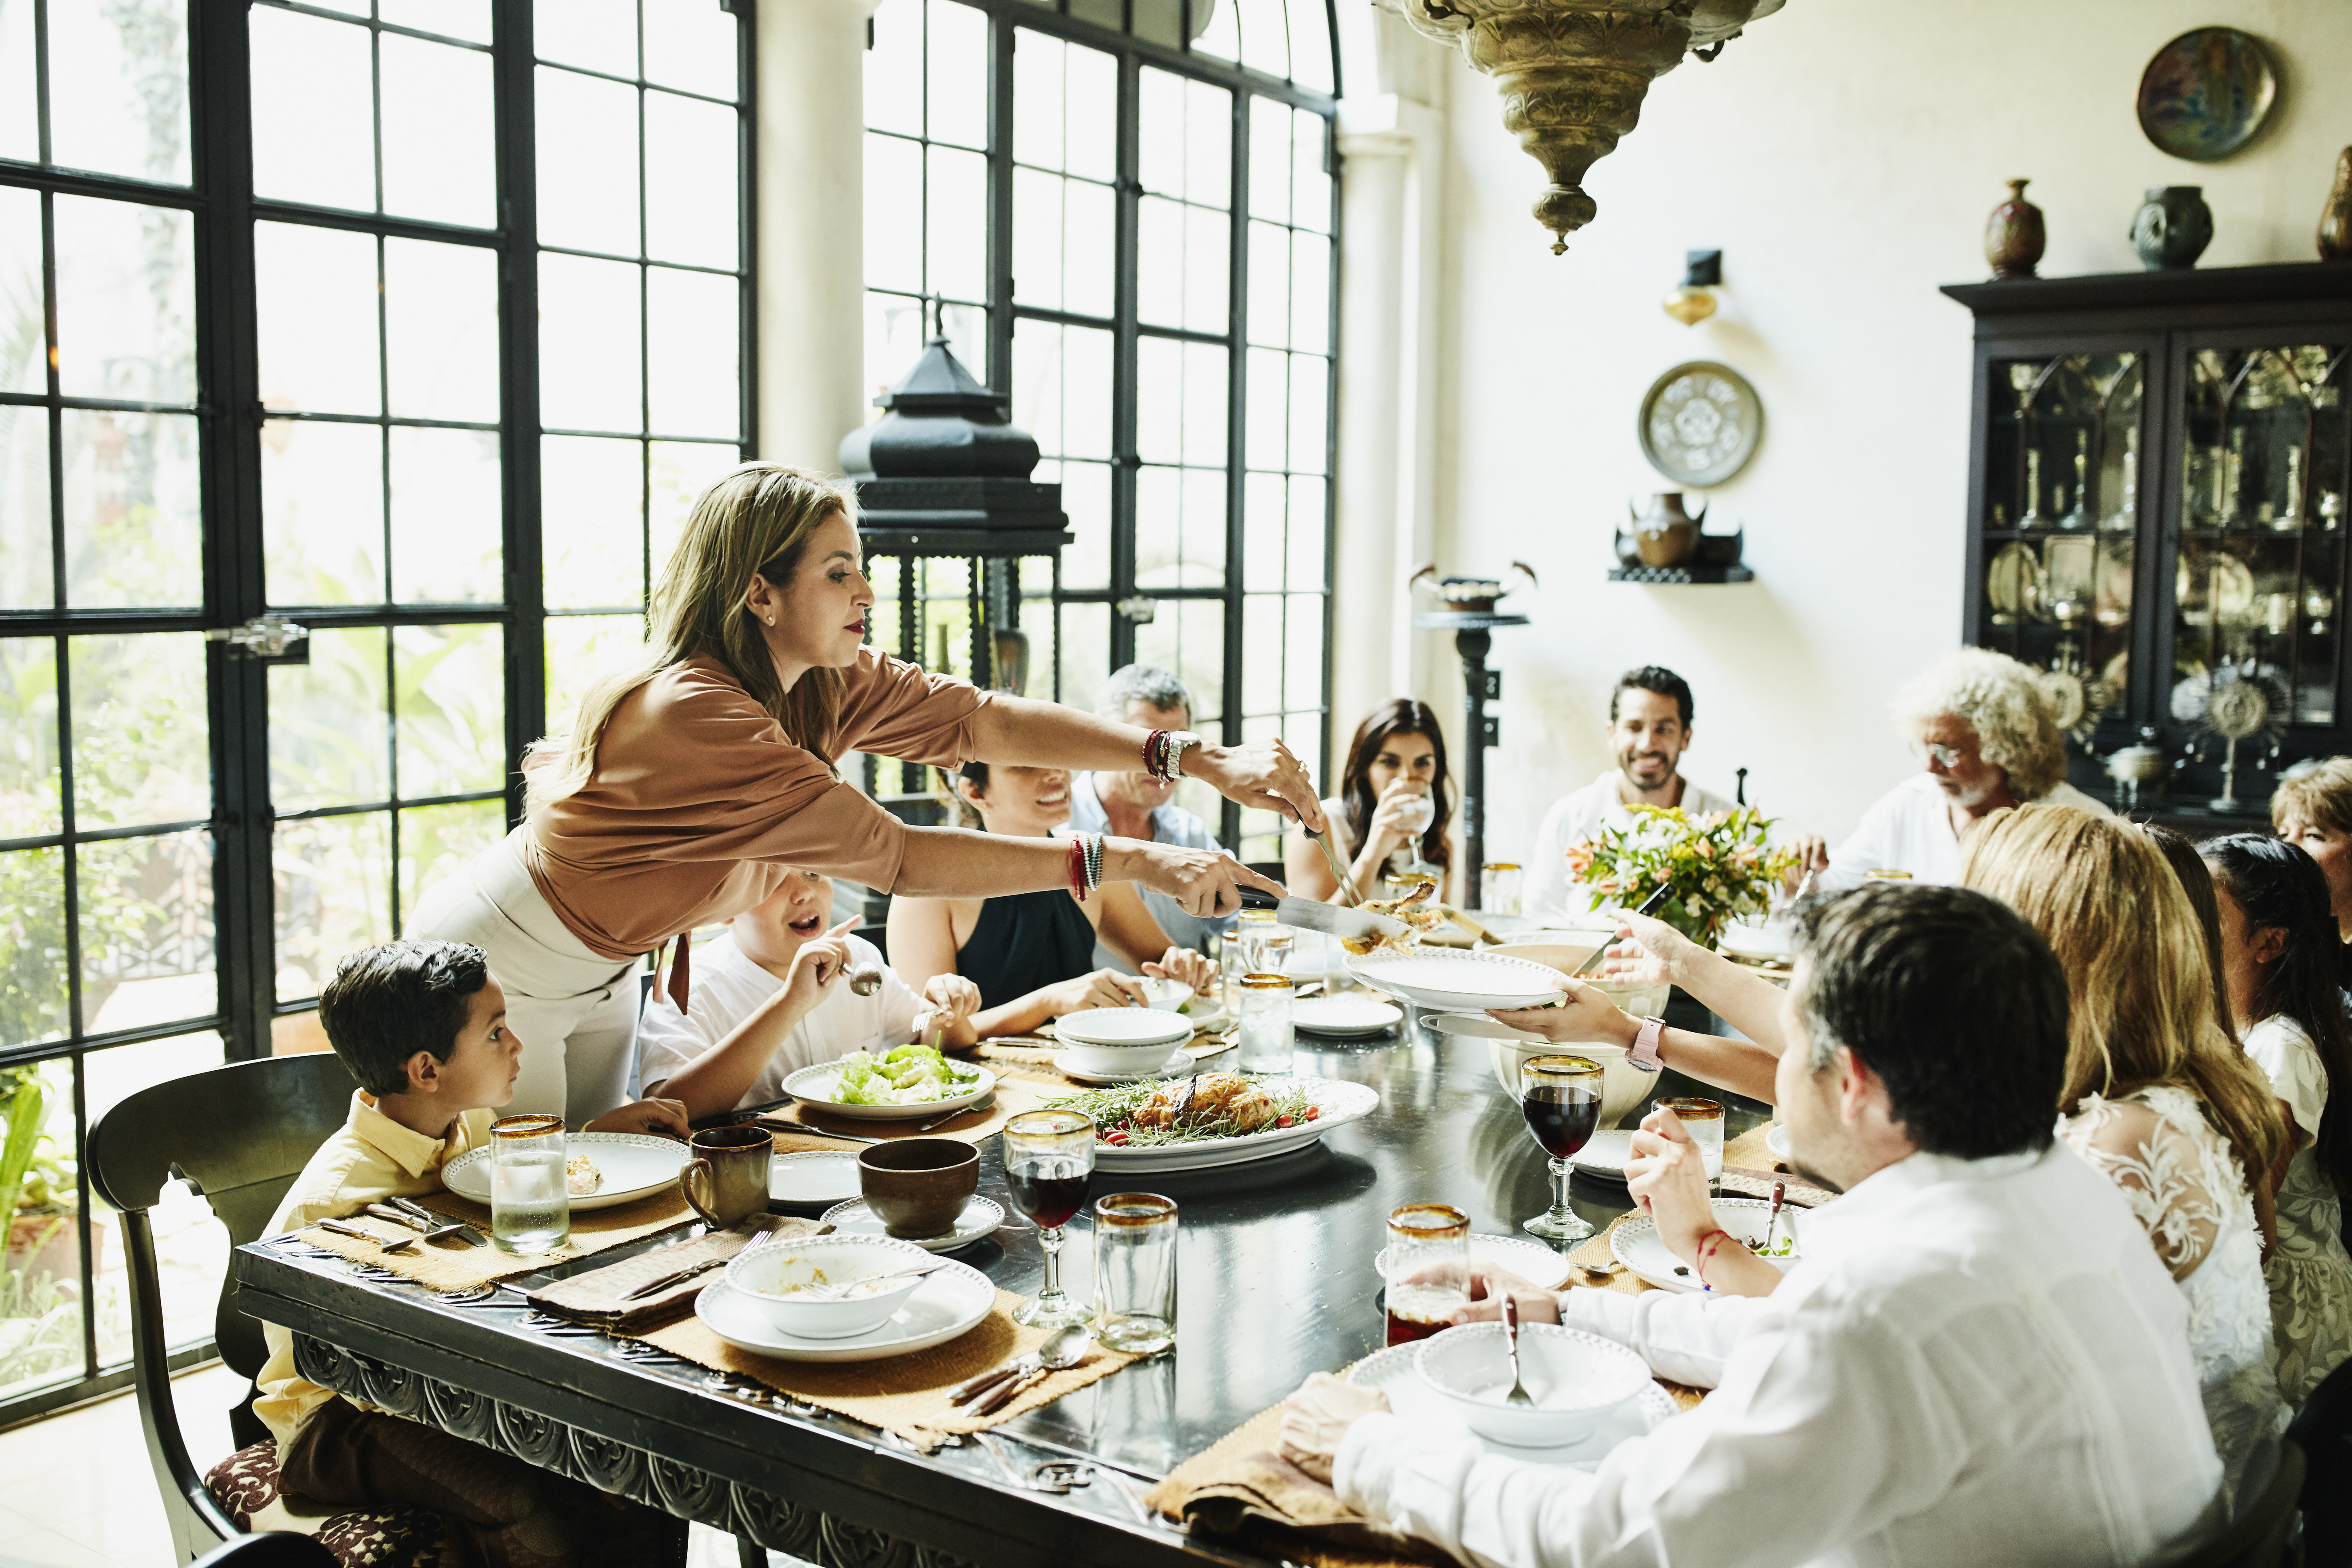 A family gathered around a dinner table | Source: Getty Images